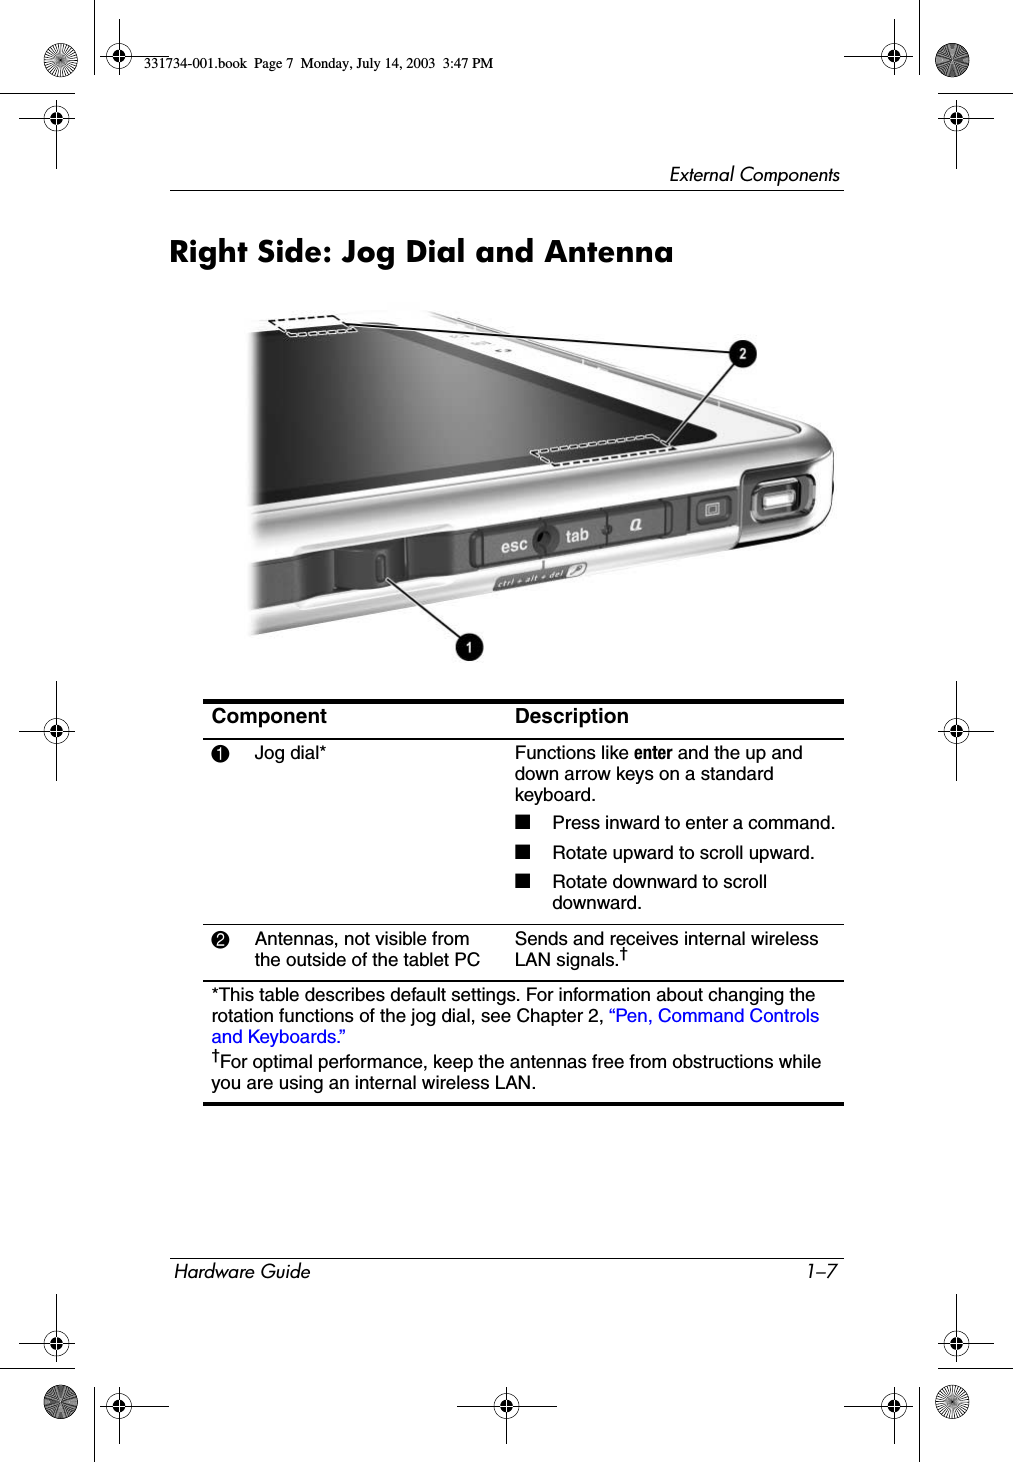 External ComponentsHardware Guide 1–7Right Side: Jog Dial and AntennaComponent Description1Jog dial* Functions like enter and the up and down arrow keys on a standard keyboard.■Press inward to enter a command.■Rotate upward to scroll upward.■Rotate downward to scroll downward.2Antennas, not visible from the outside of the tablet PCSends and receives internal wireless LAN signals.†*This table describes default settings. For information about changing the rotation functions of the jog dial, see Chapter 2, “Pen, Command Controls and Keyboards.”†For optimal performance, keep the antennas free from obstructions while you are using an internal wireless LAN.331734-001.book  Page 7  Monday, July 14, 2003  3:47 PM